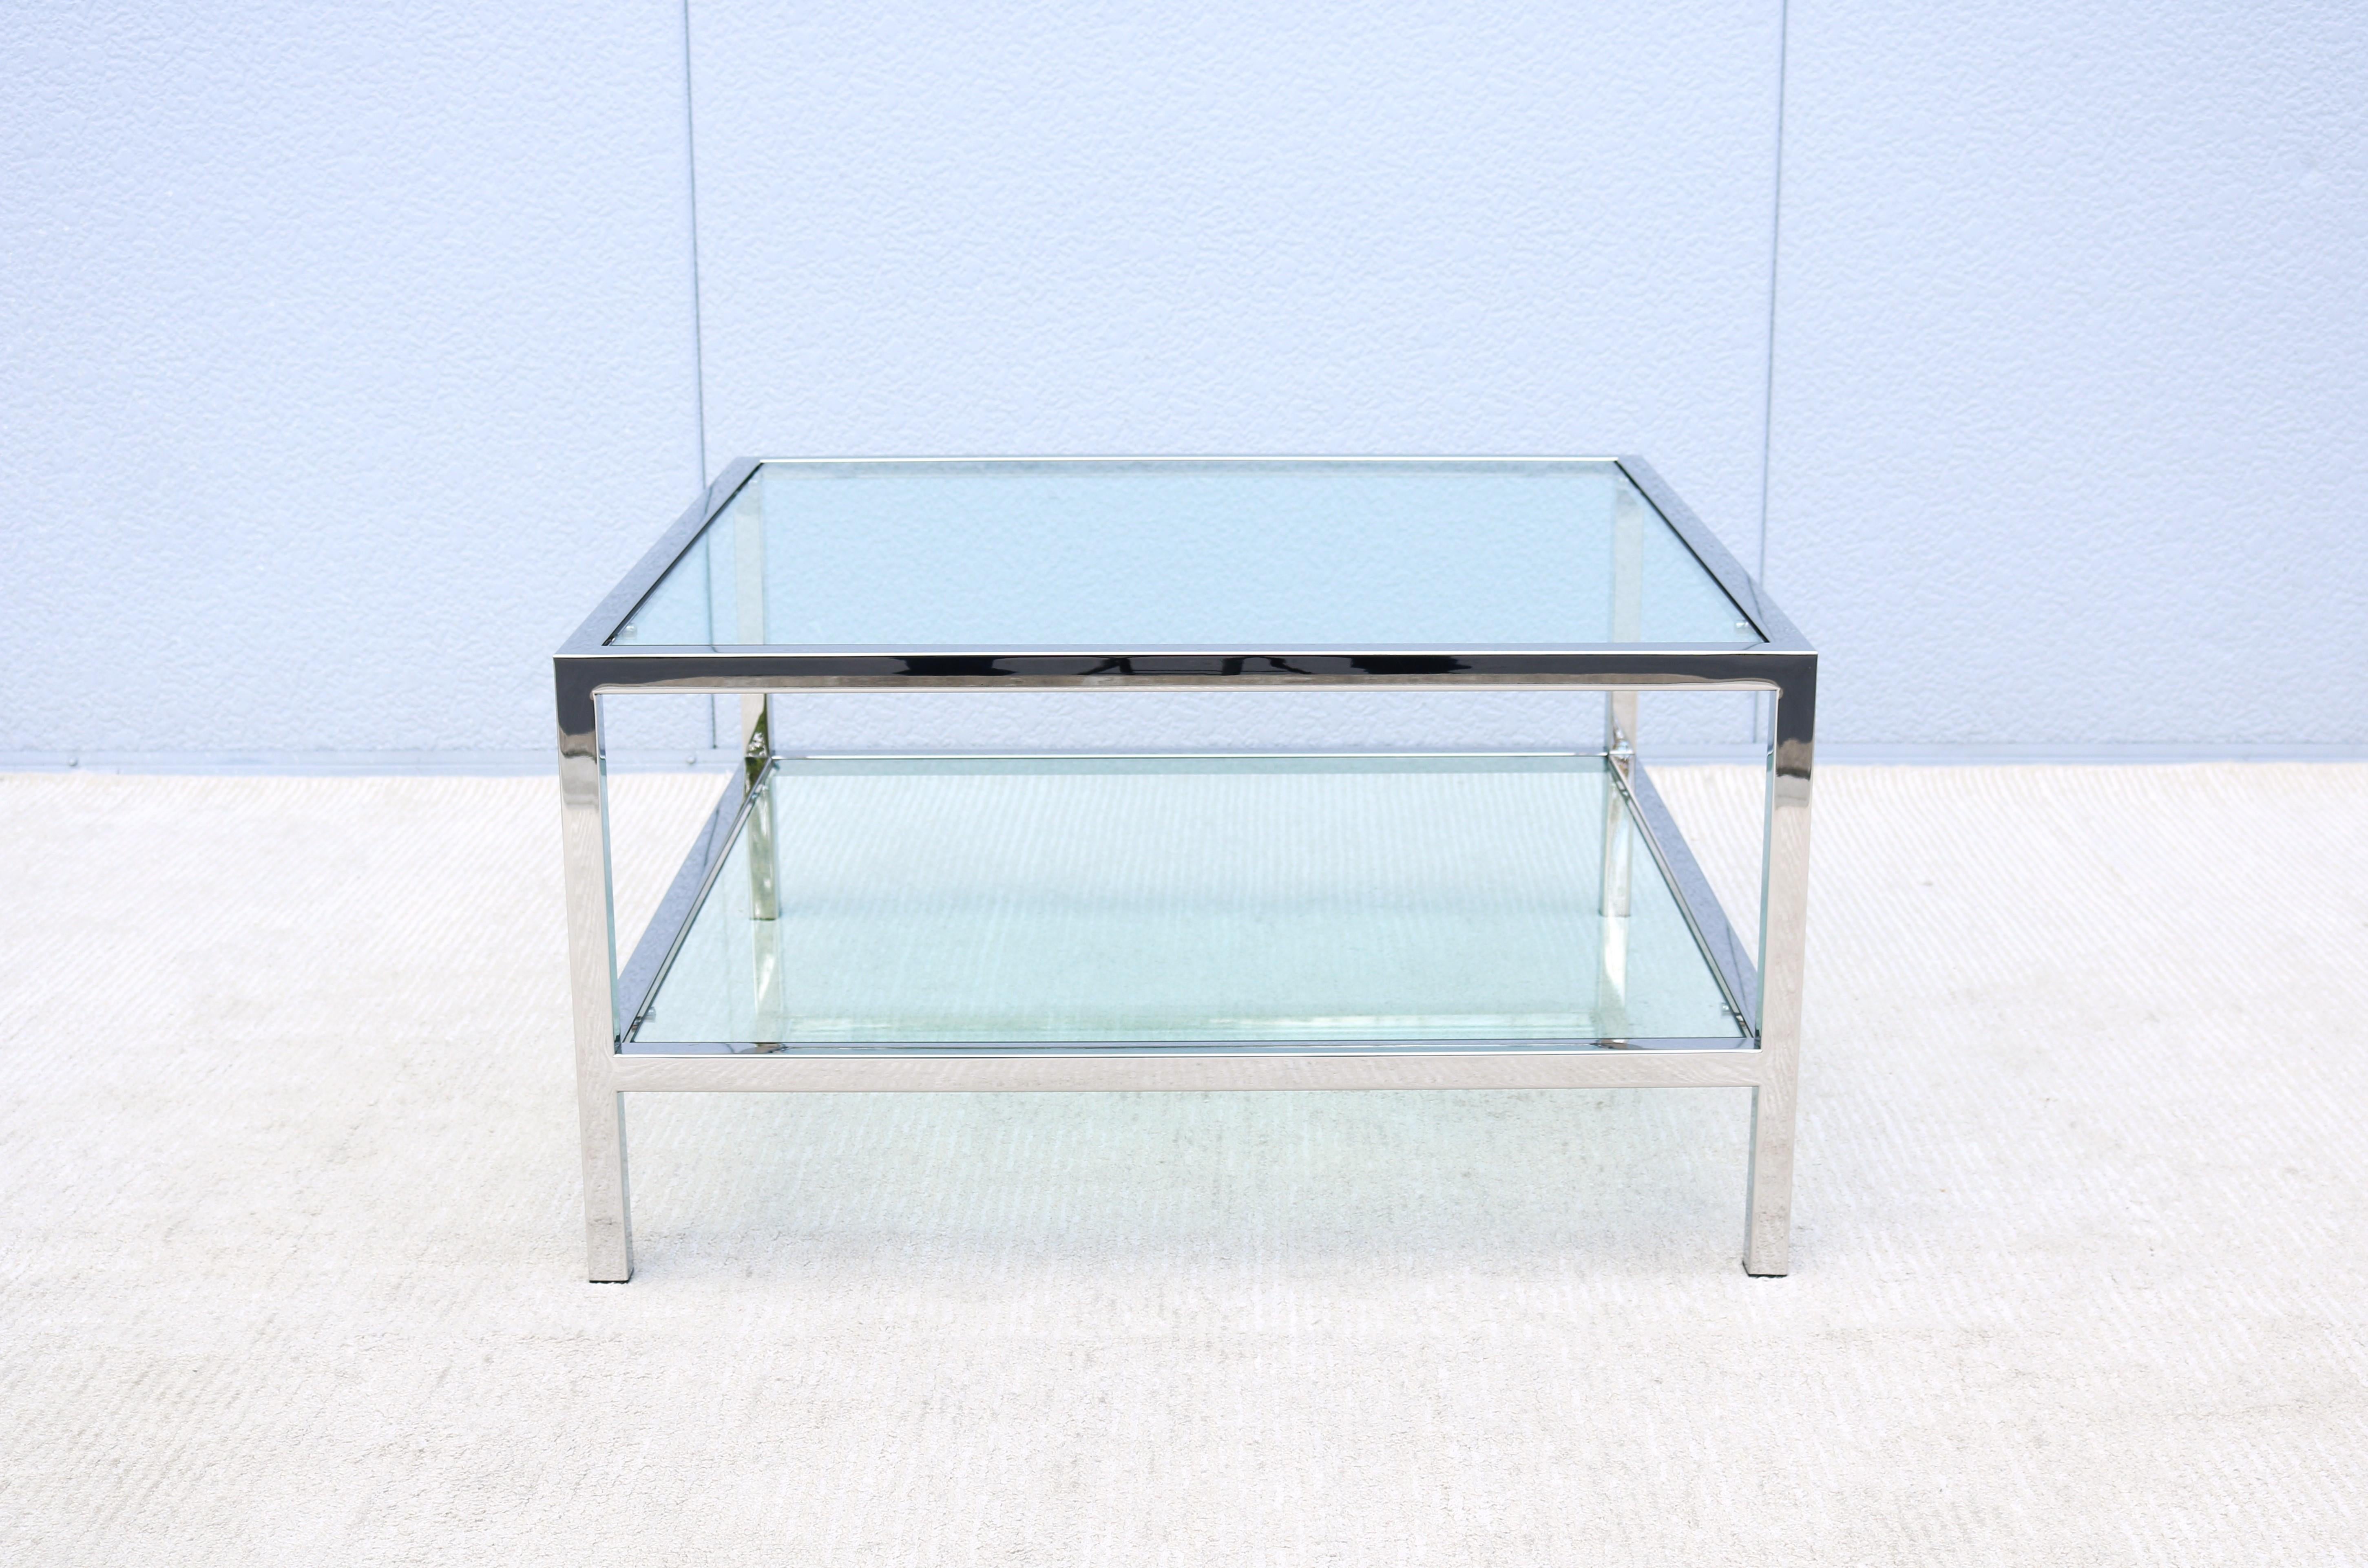 Stunning and elegant looking mid-century modern Milo Baughman style polished stainless steel and inset glass top square coffee table.
Features a lower open glass shelf, that adds a perfect spot for books, a basket, or other personal items.
This